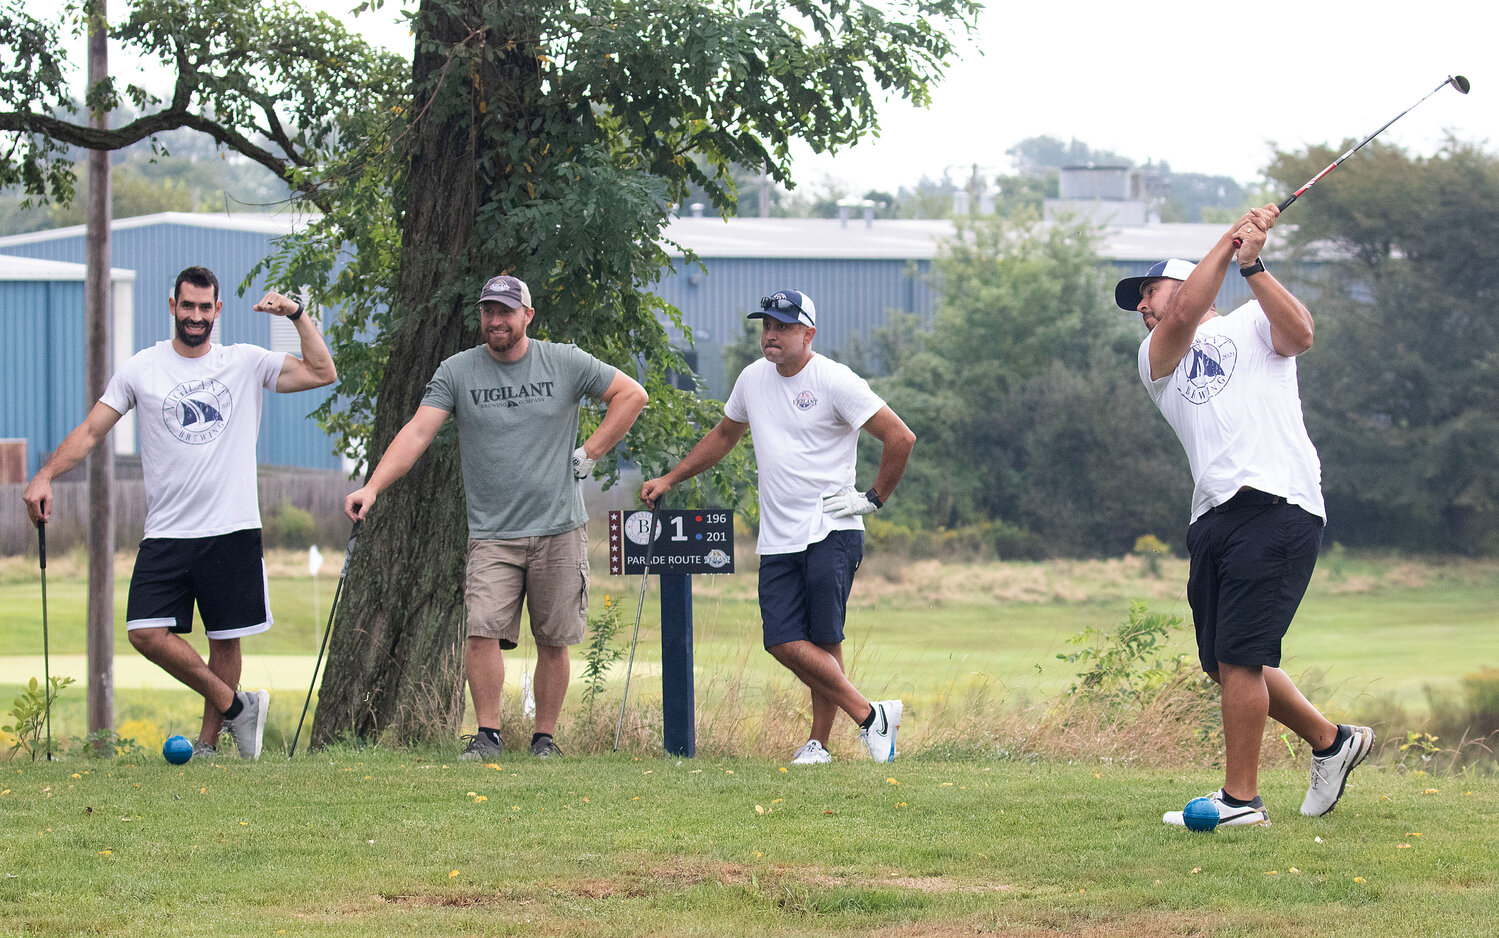 Derek Ferreira (left), Mike Godet, and Luis Medeiros watch Kevin Amaral of Vigilant Brewing Company tee off on the first hole at the Bristol Golf Park.